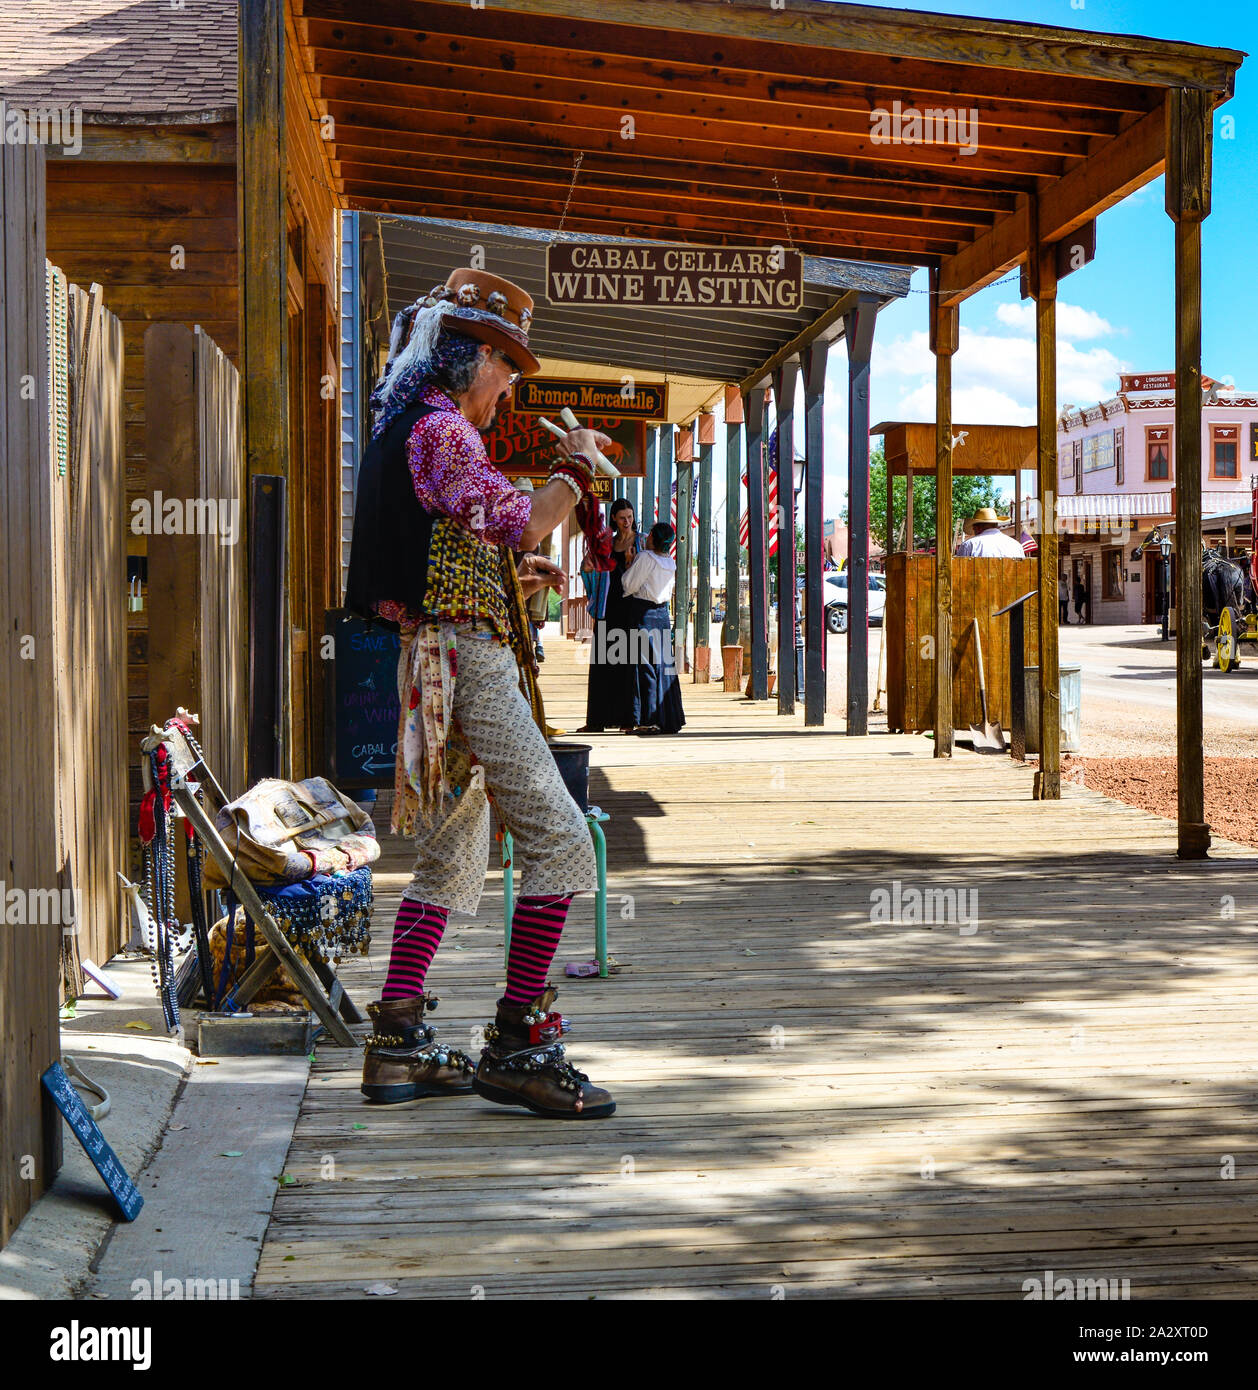 An eccentric performing artist, dressed wildly and using bone castanets dances for tips from tourists along the storefronts in Tombstone, AZ, USA Stock Photo